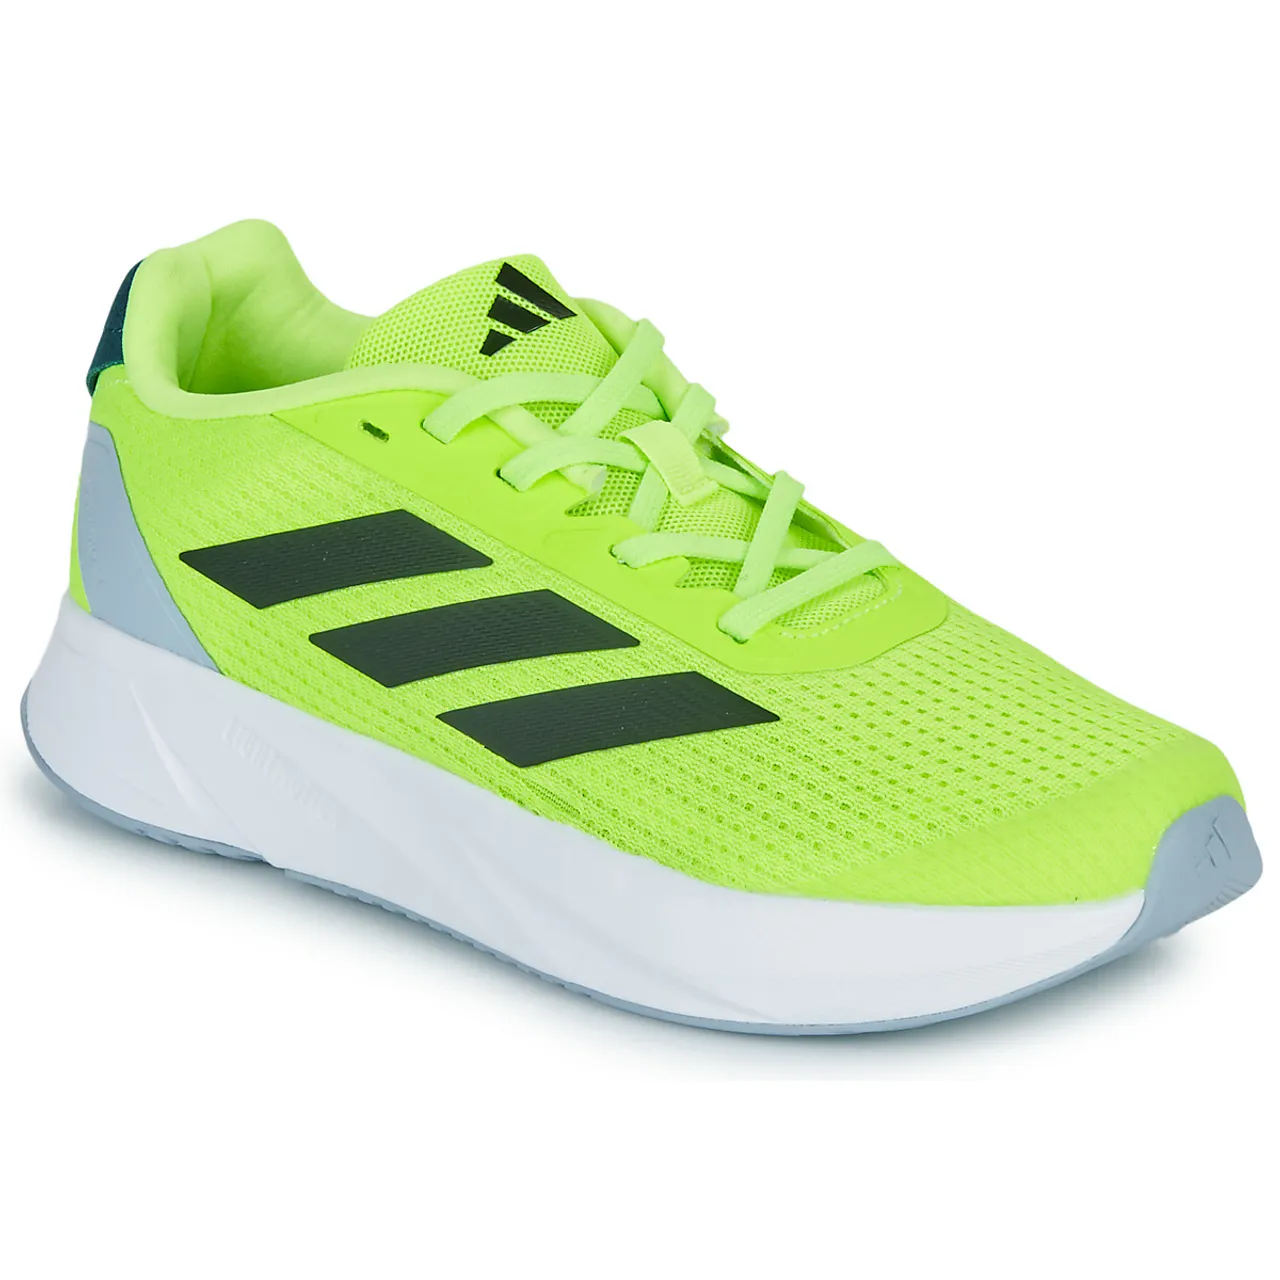 adidas  DURAMO SL K  boys's Children's Shoes (Trainers) in Yellow